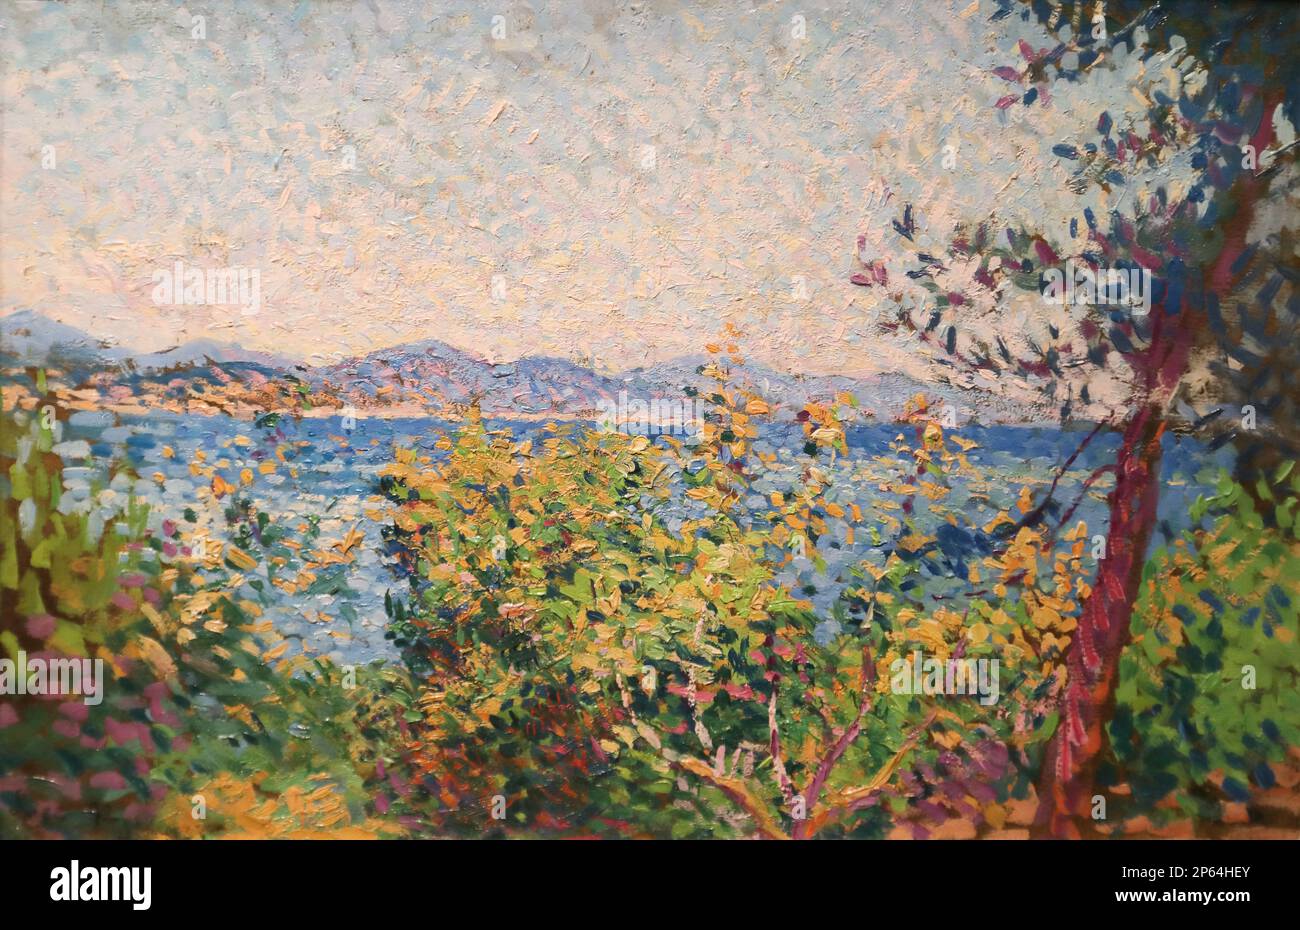 Samois by French painter Paul Signac at the Wallraf-Richartz Museum, Cologne, Germany Stock Photo